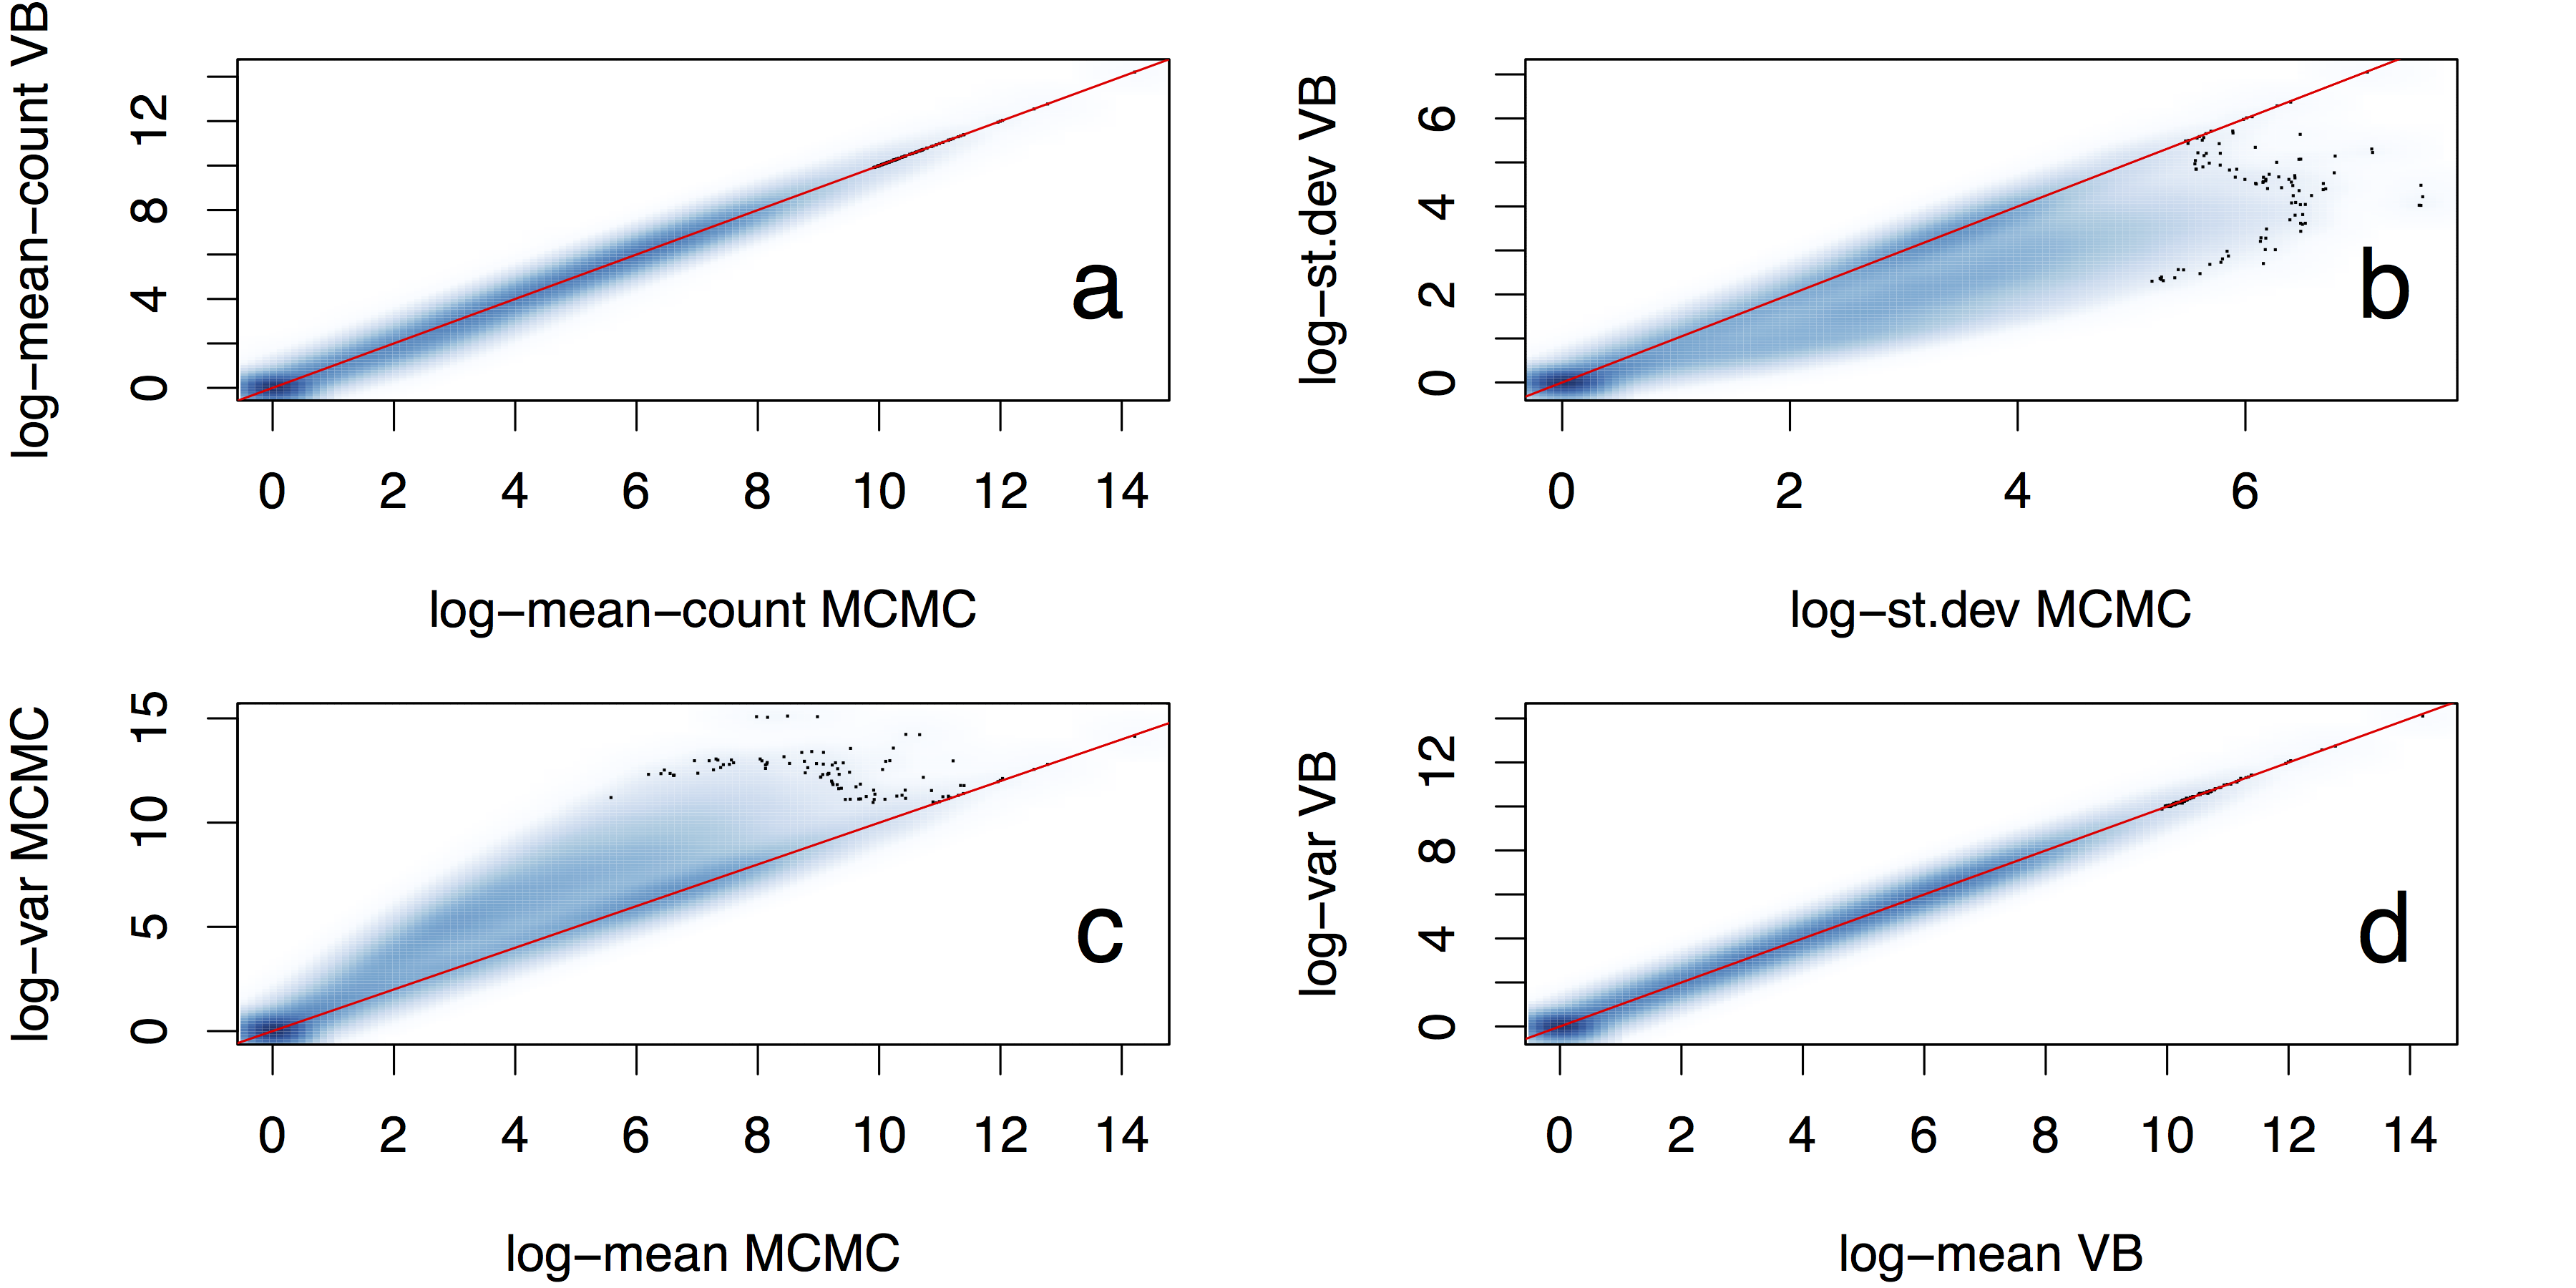 Comparison of posterior means and standard deviations over gene transcript expression levels inferred using MCMC and variational inference (denoted VB) (Hensman *et al.*, Fast and accurate approximate inference of transcript expression from RNA-seq data. *Bioinformatics* 2015).